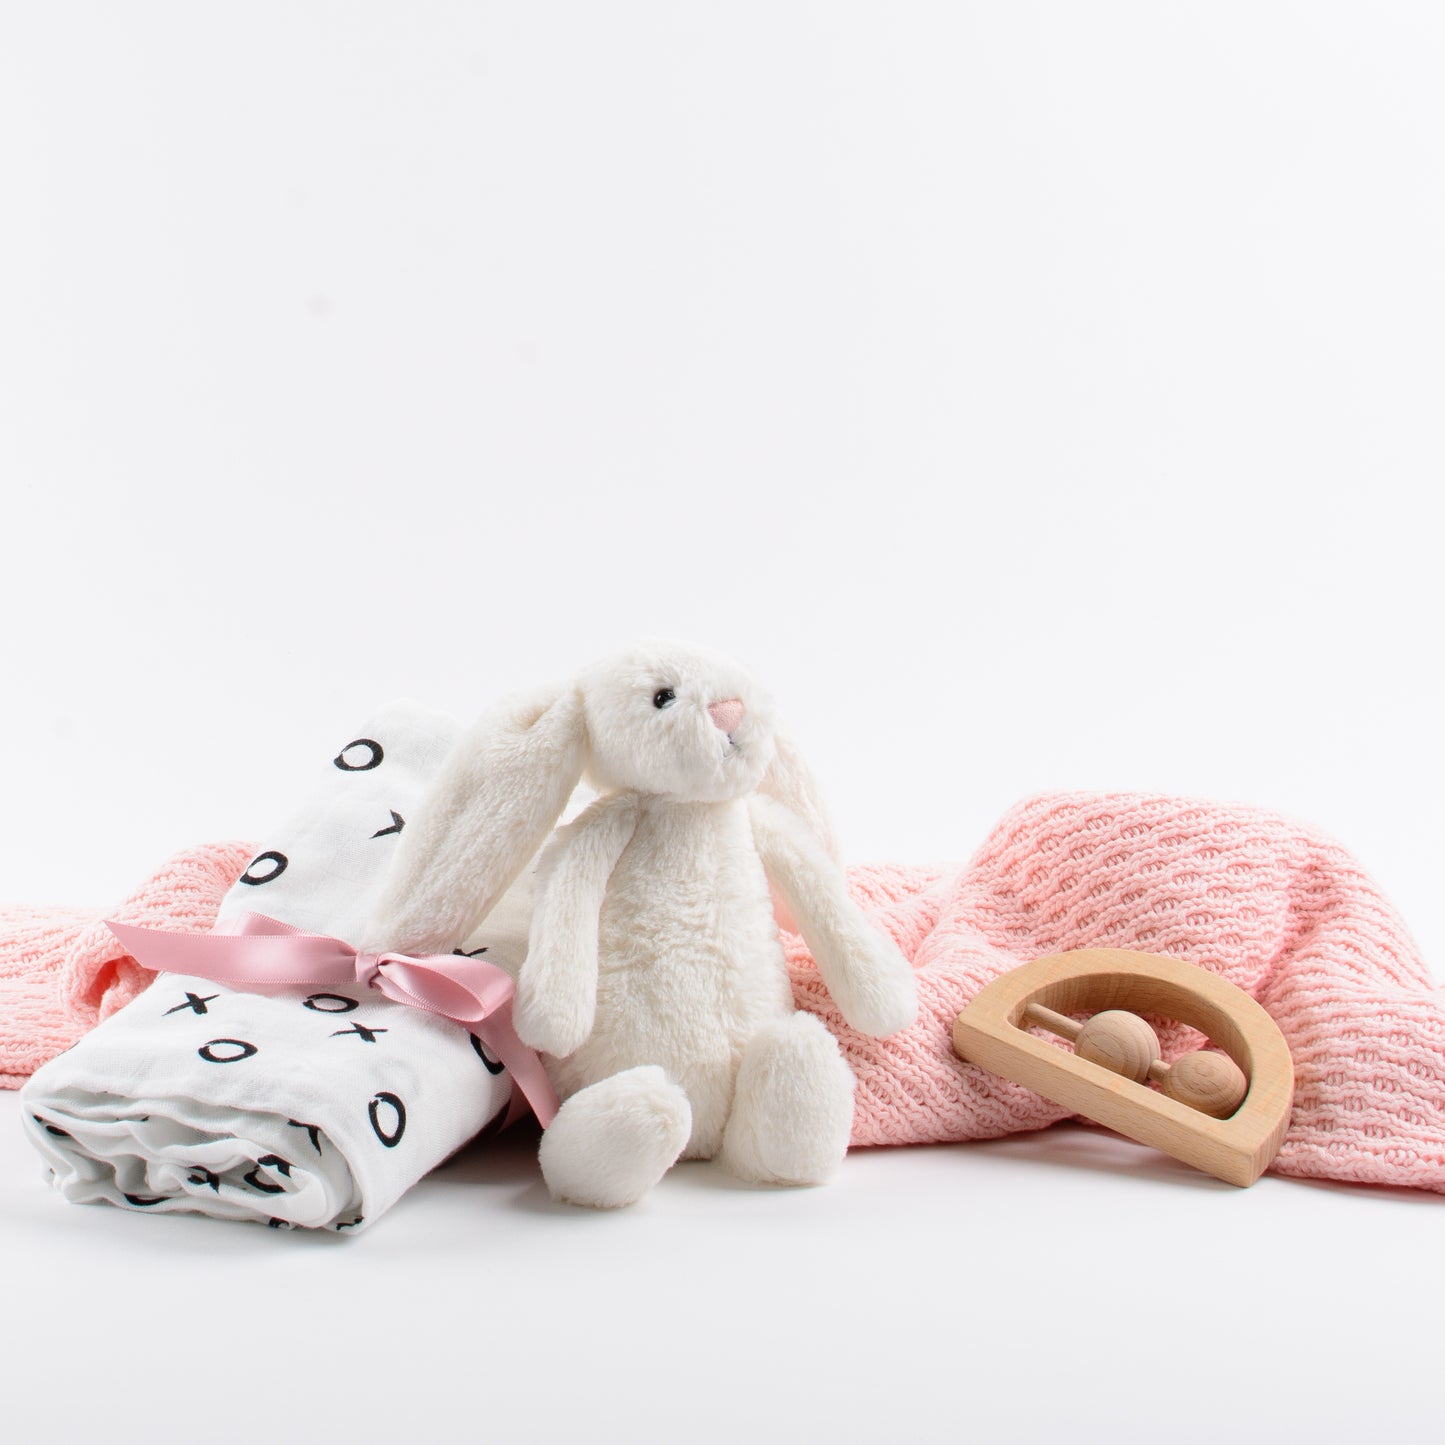 Products shown out of gift box are soft toy, swaddle, blanket, teether.